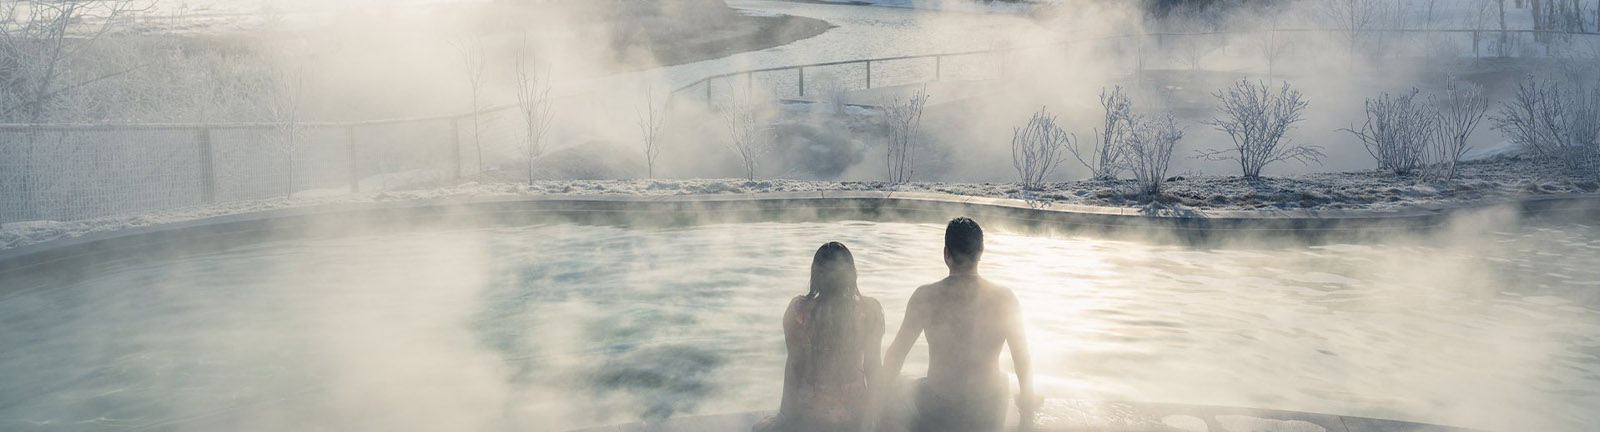 two bathers in a natural hot spring